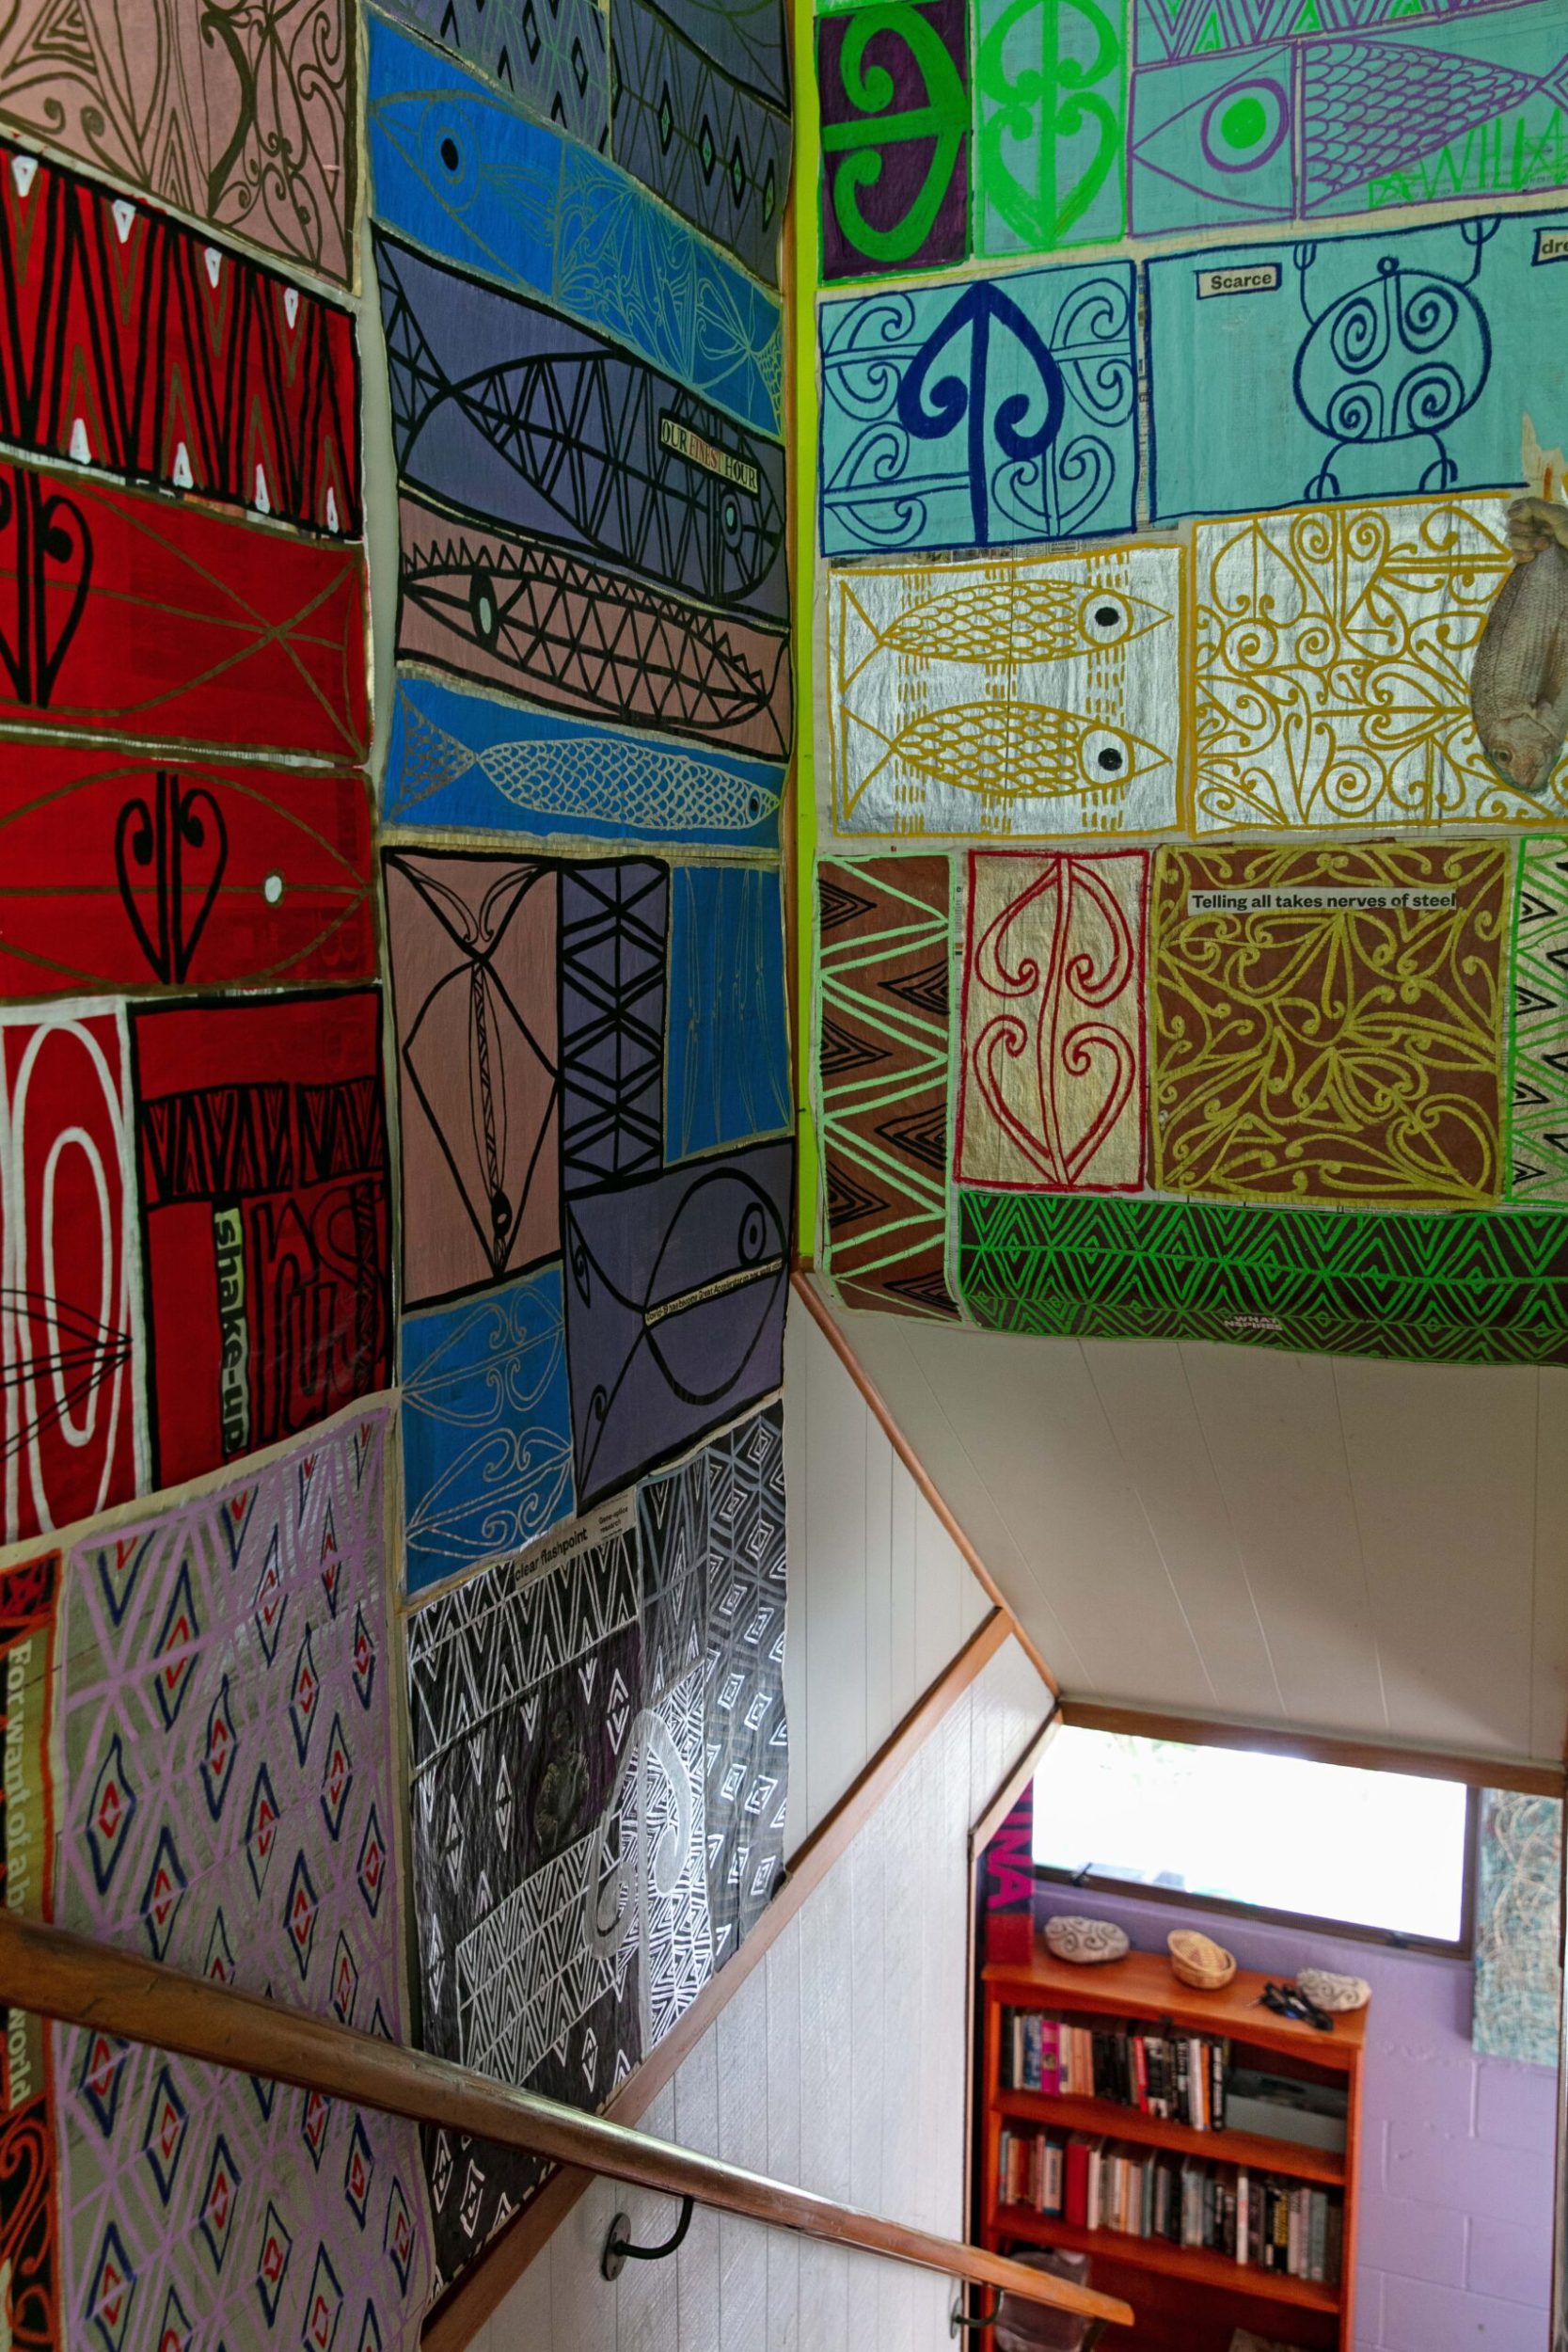 A stairway with walls decorated by Māori art by Tracey Tawhiao